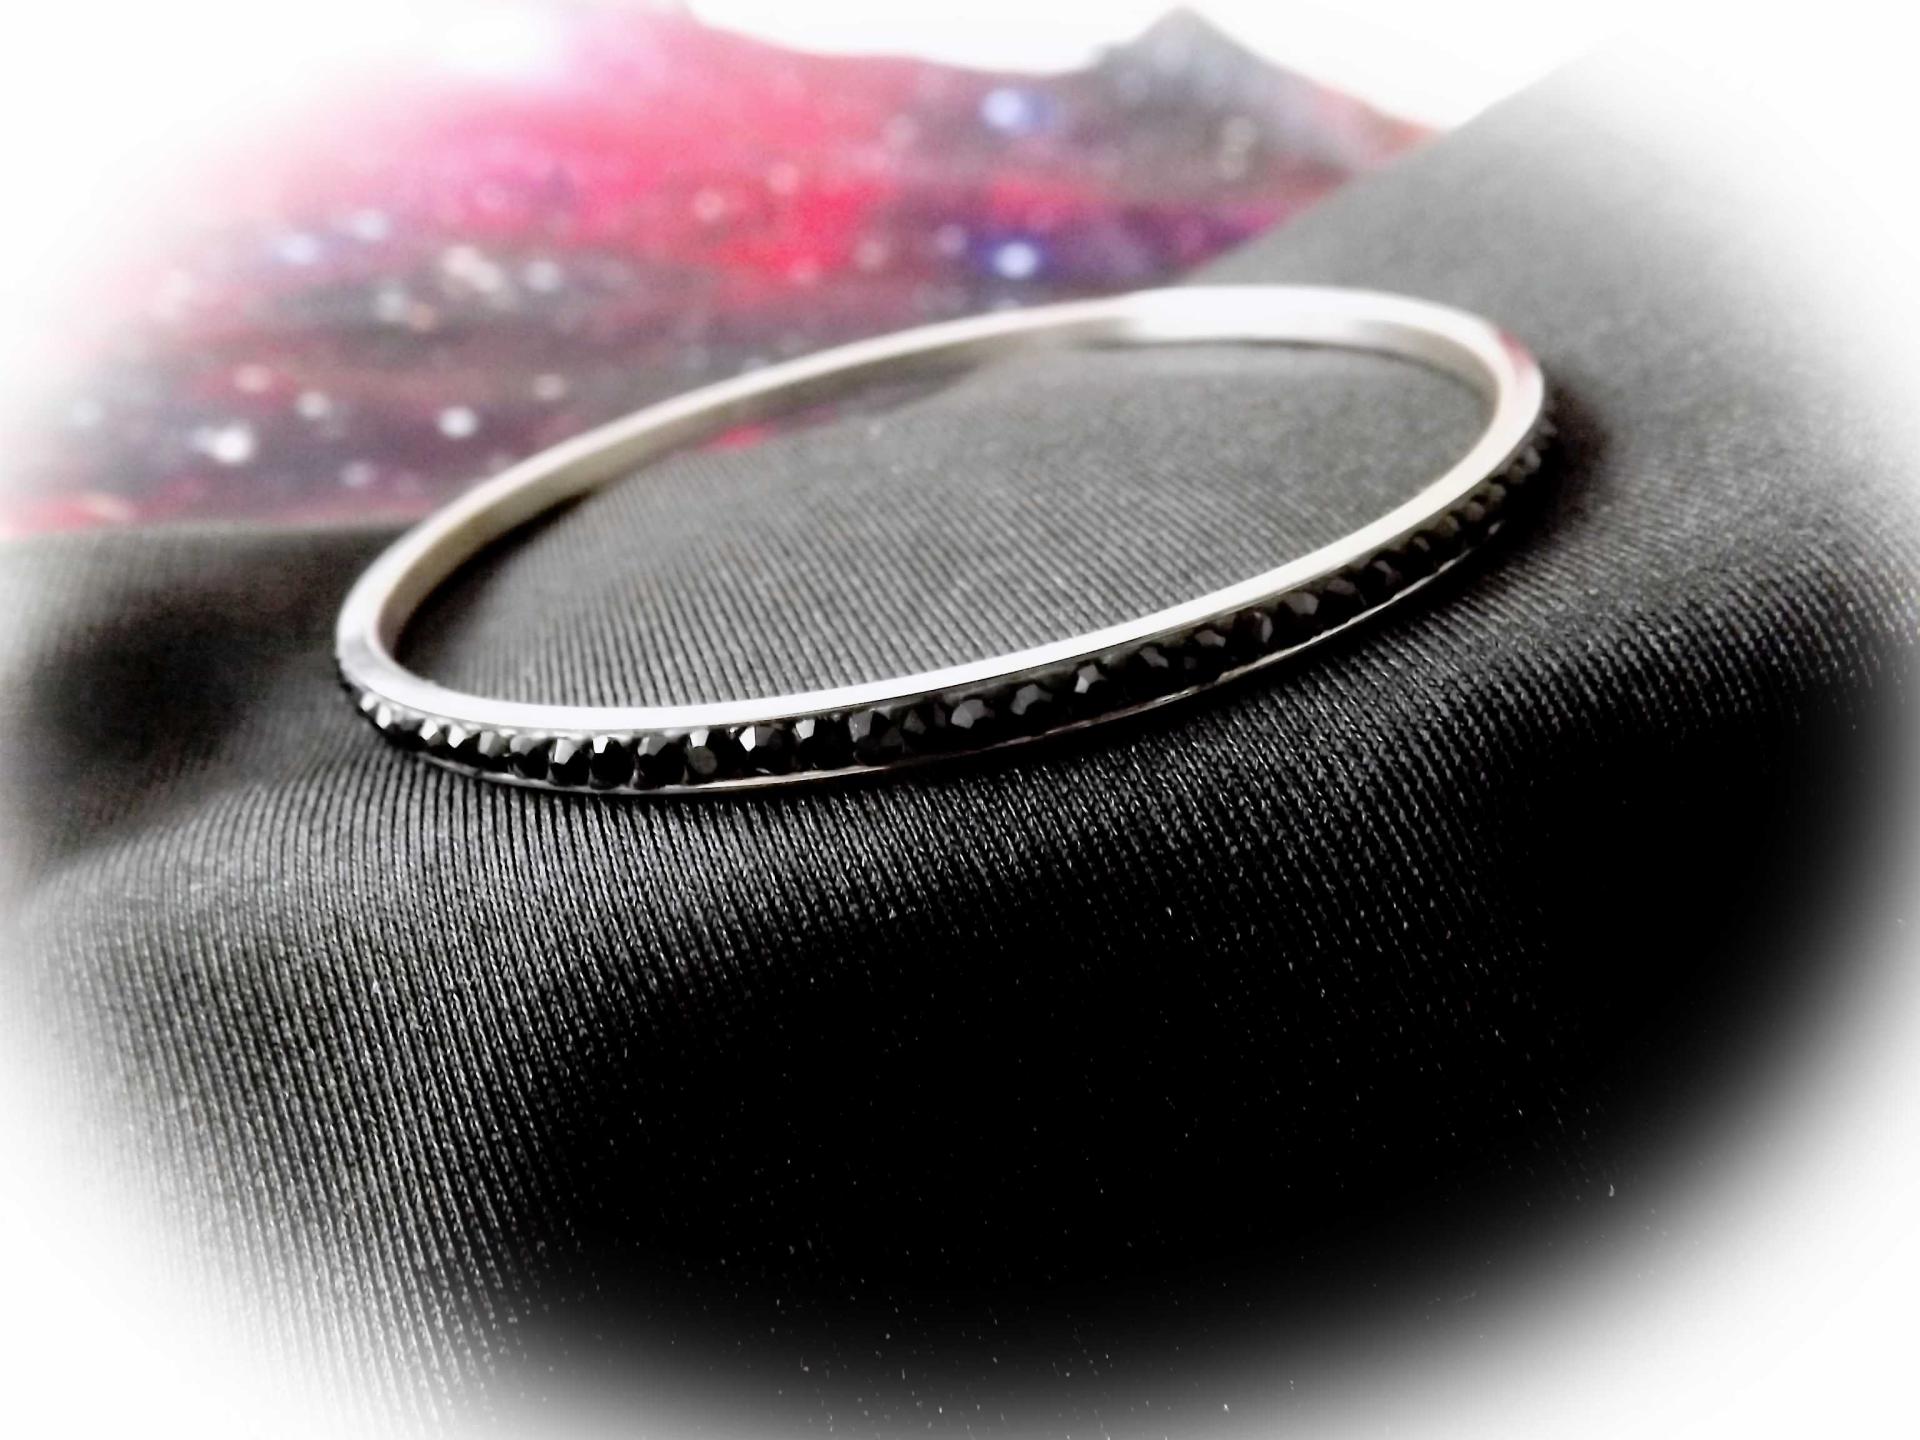 Stunning Bangle inset with black crystal stones.